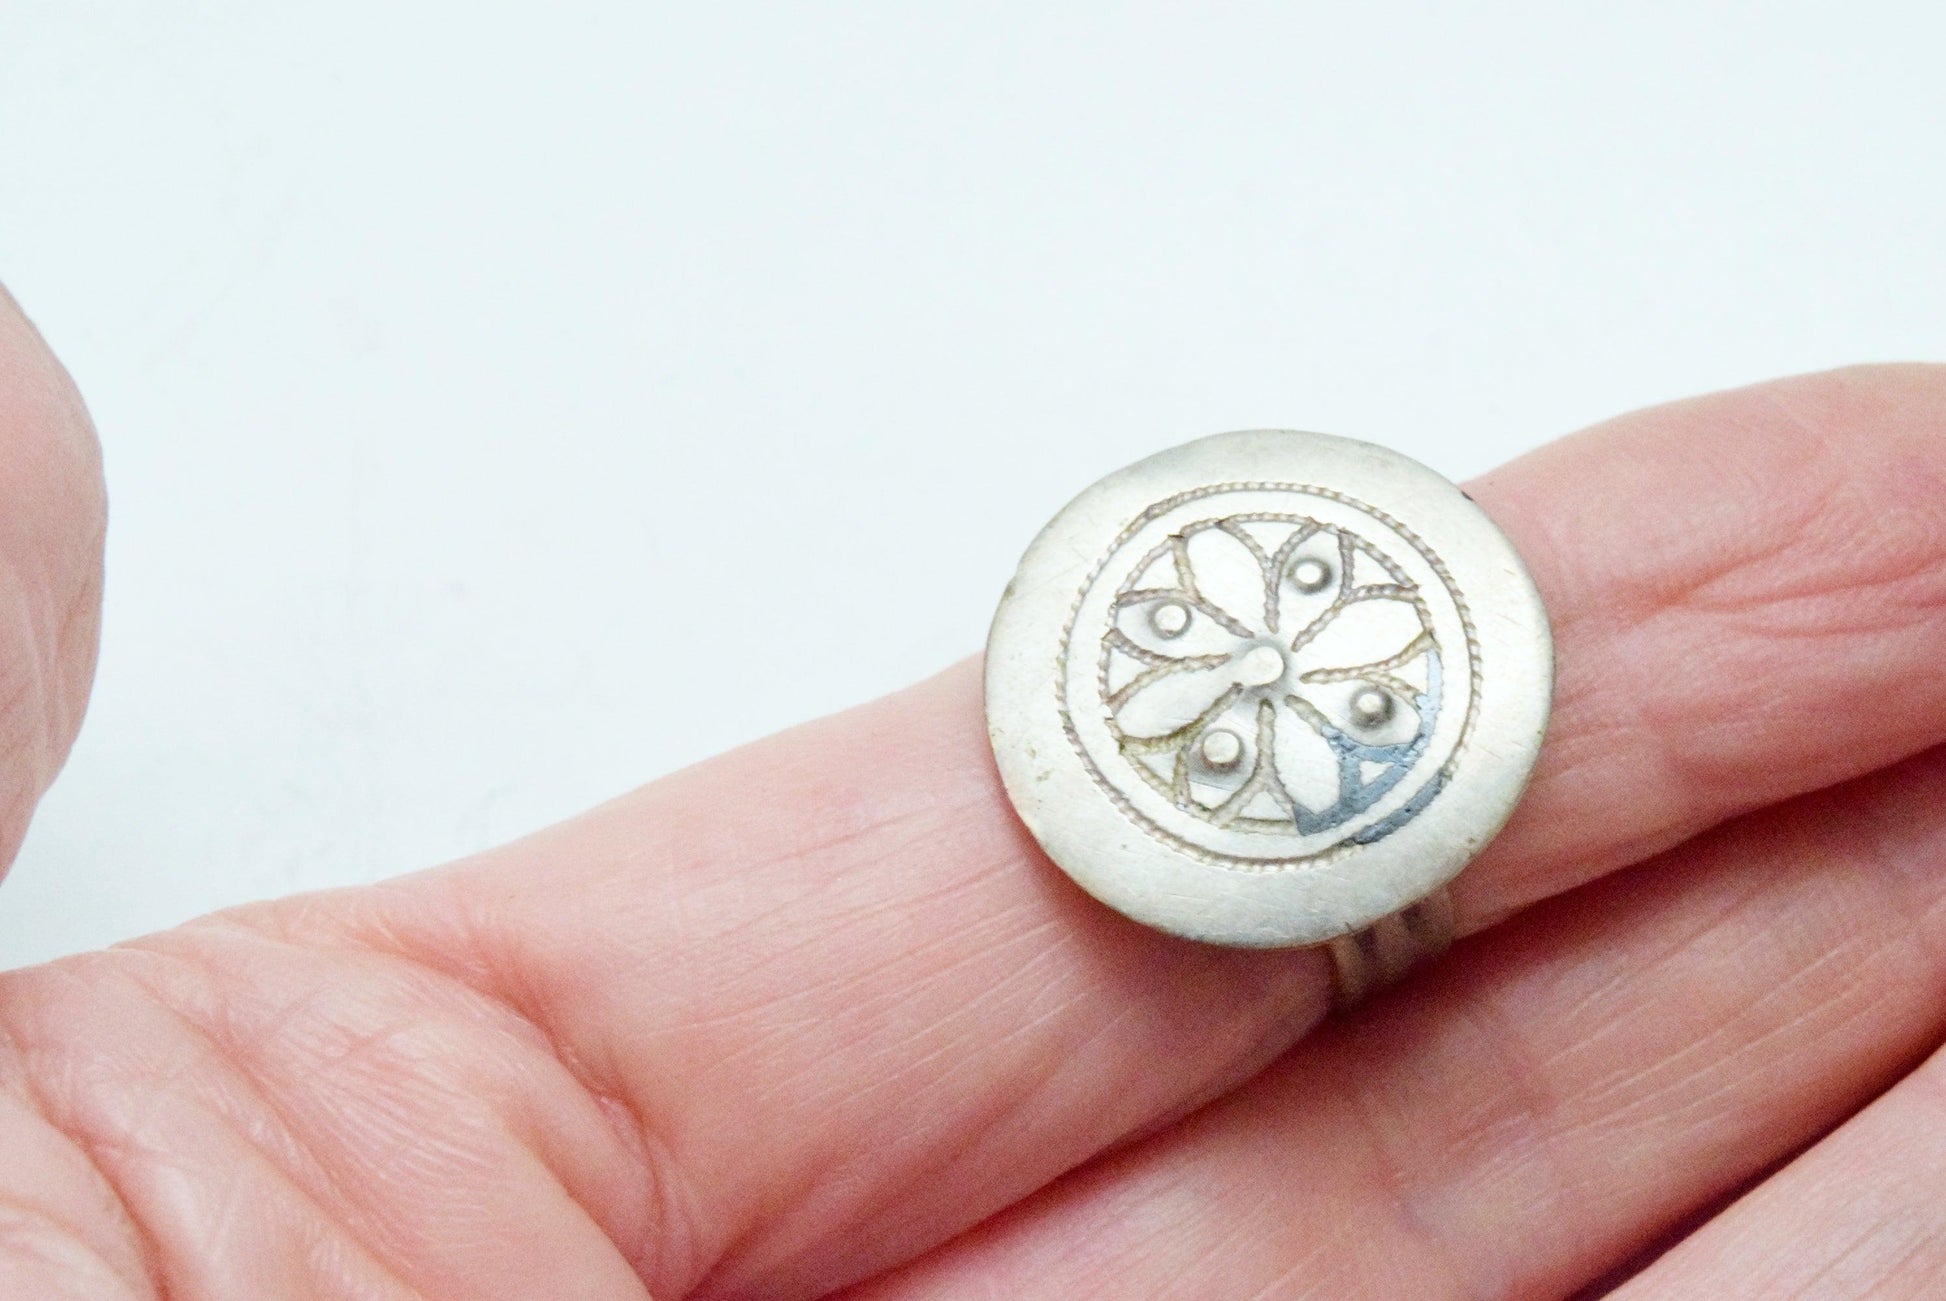 Vintage Silver Flower Ring from Morocco - Anteeka